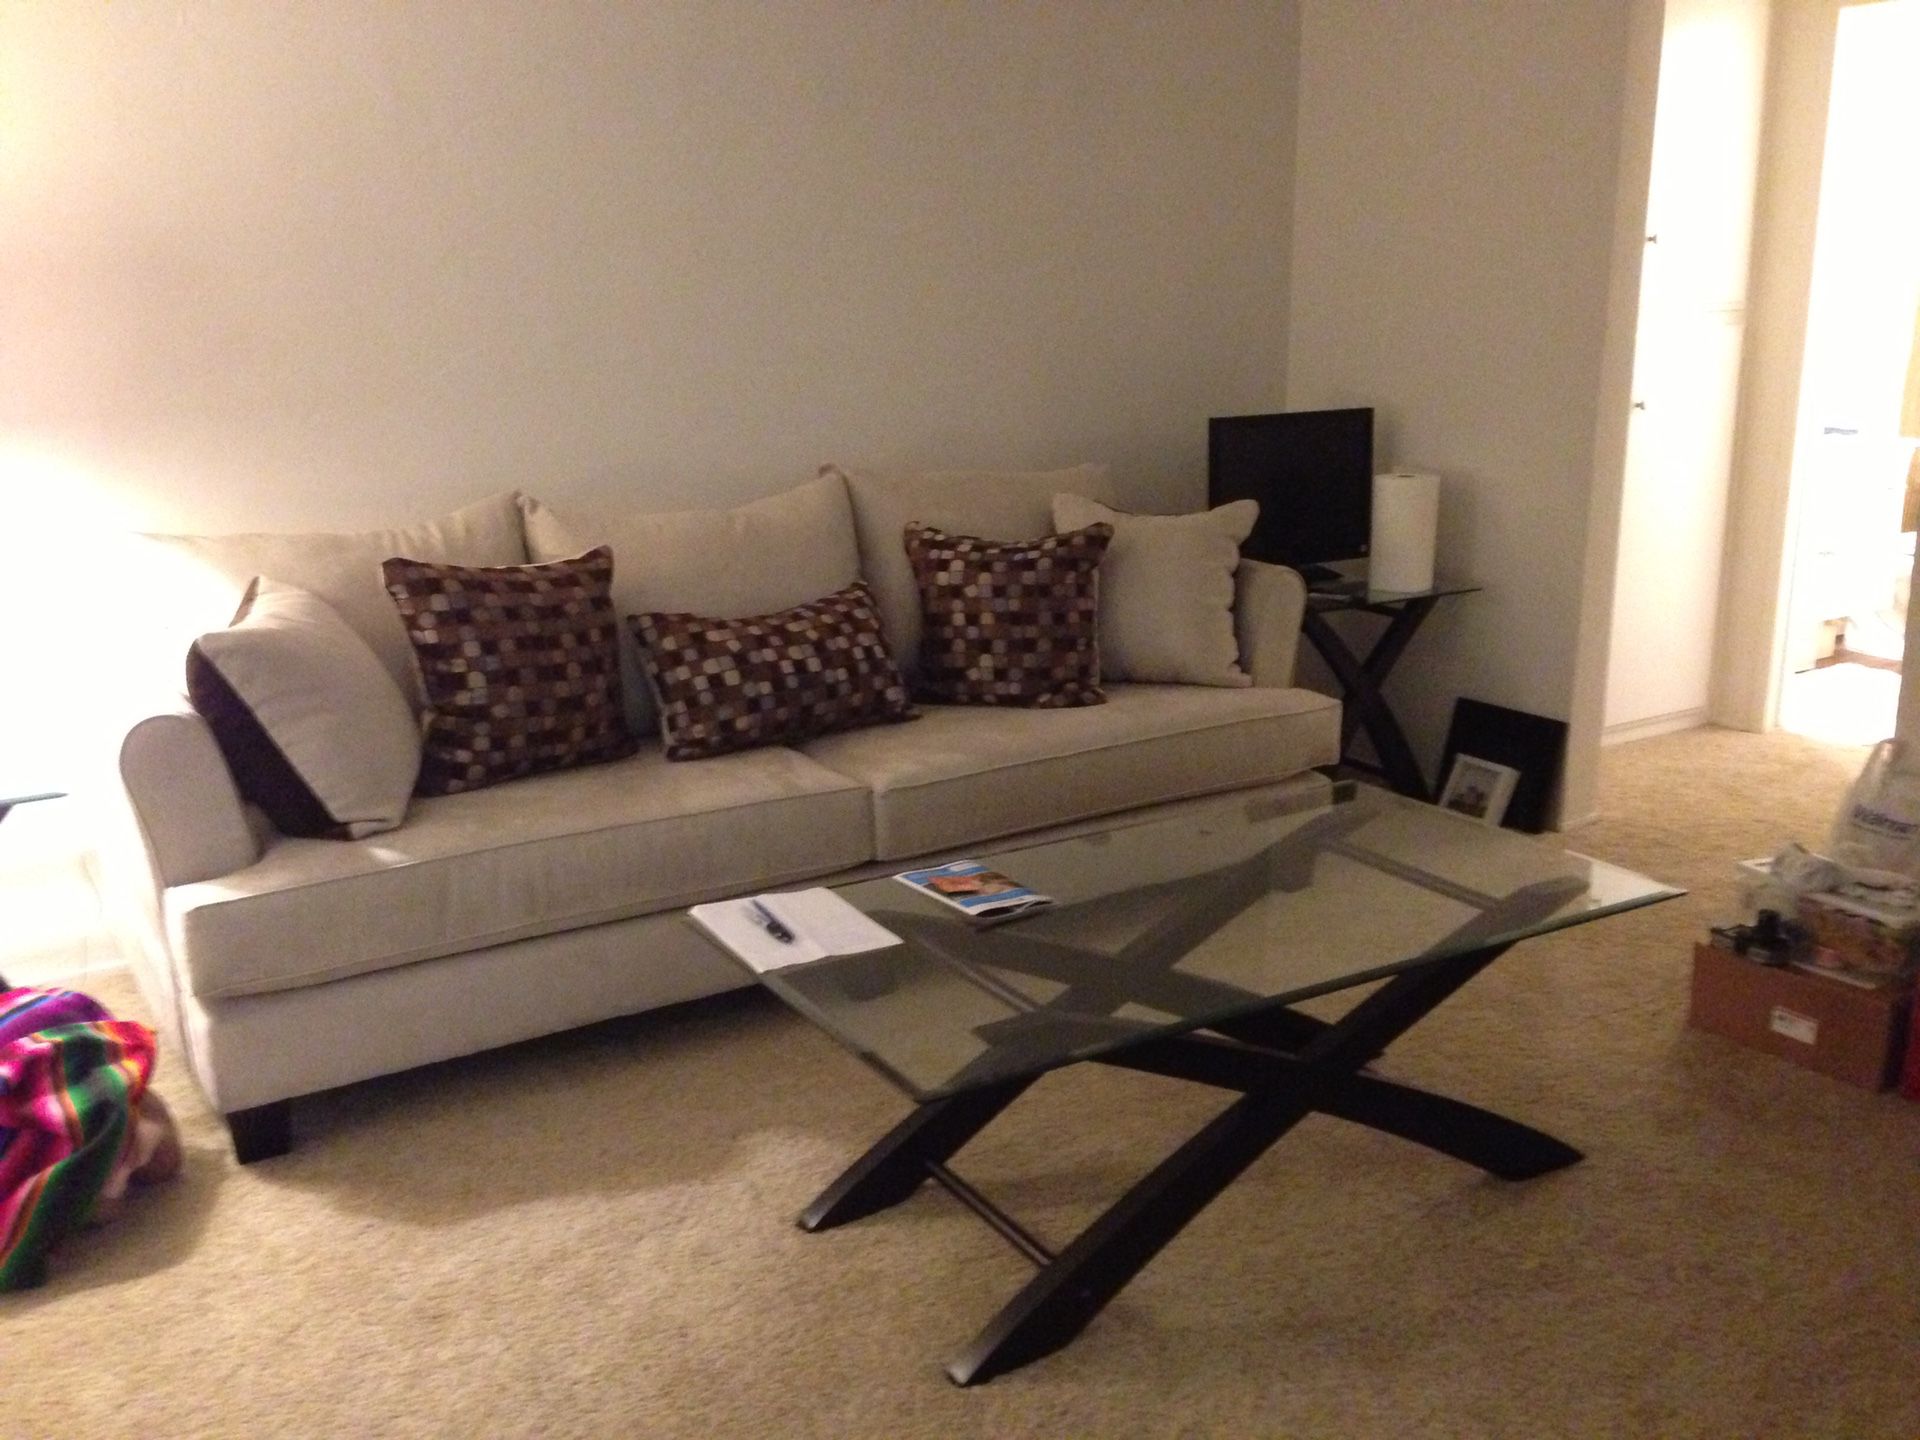 Sofa, Coffee table and two glass end tables.